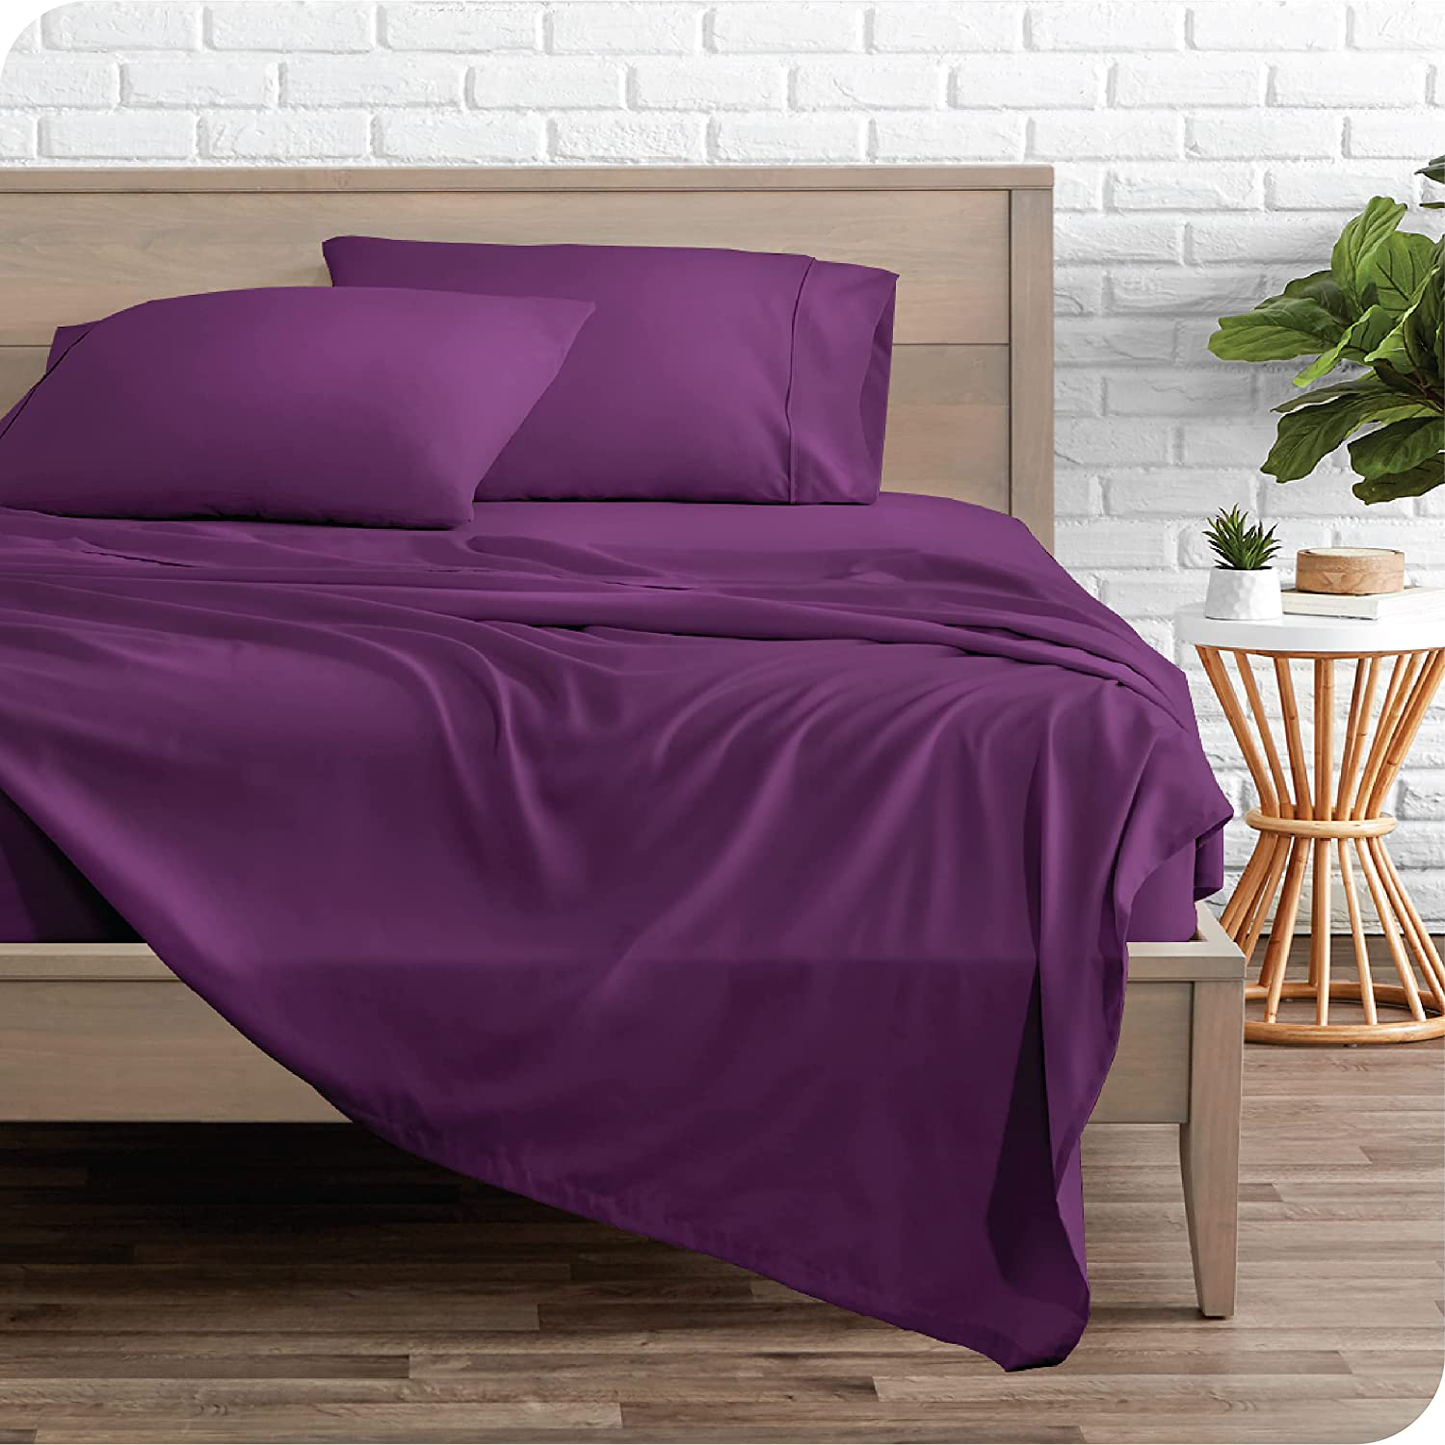 Bare Home Twin Sheet Set - 1800 Ultra-Soft Microfiber Twin Bed Sheets - Double Brushed - Twin Sheets Set - Deep Pocket - Bedding Sheets & Pillowcases (Twin, Plum)